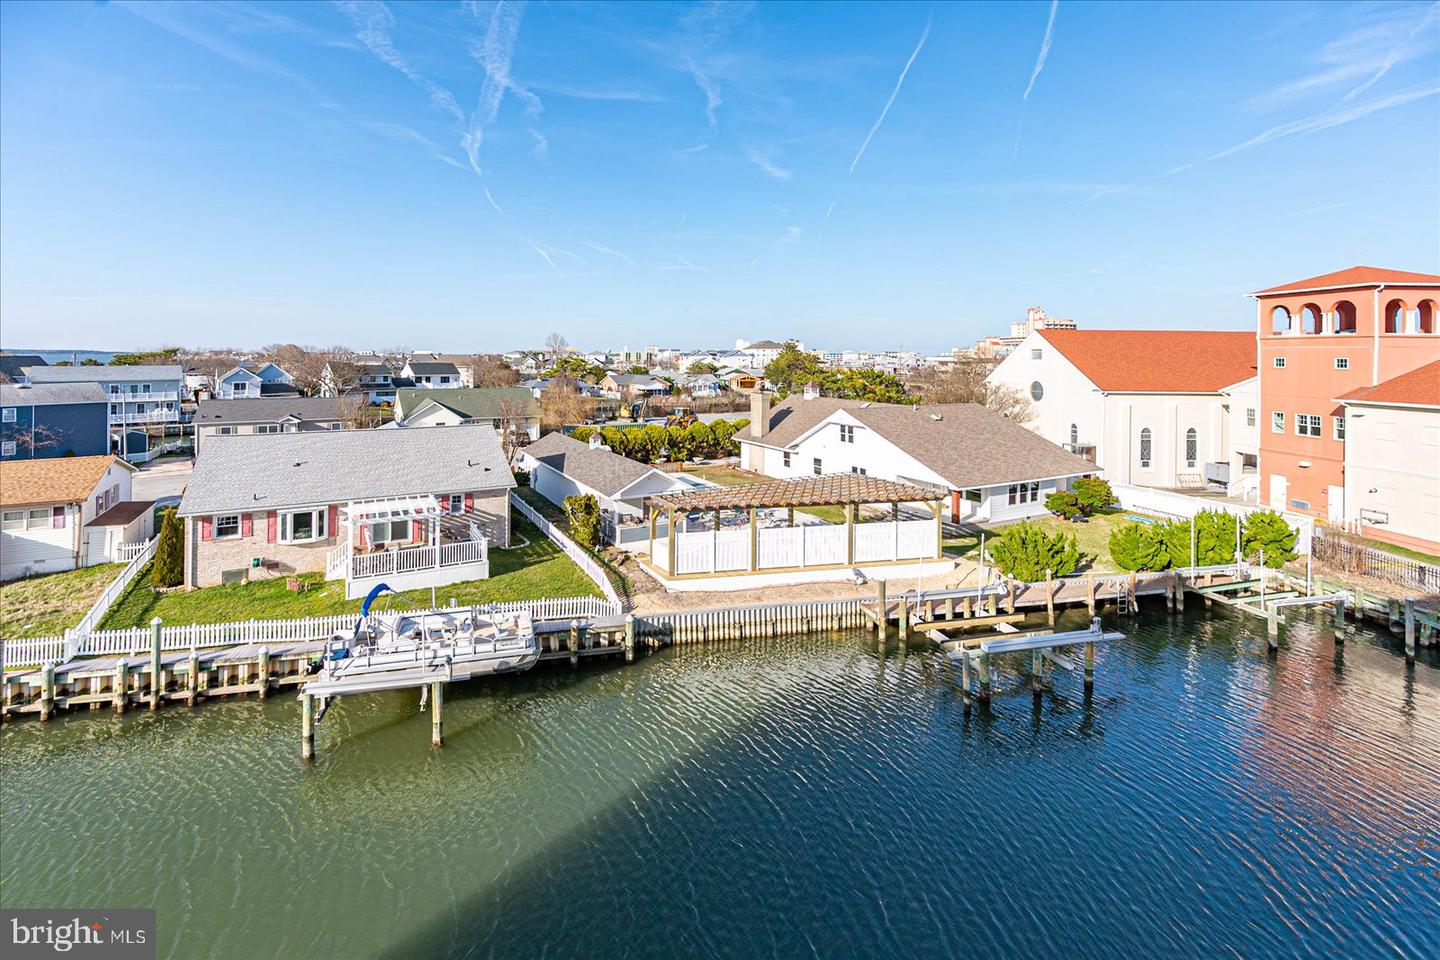 MDWO2019672-802922311024-2024-03-15-14-18-05 300 17th St #303 | Ocean City, MD Real Estate For Sale | MLS# Mdwo2019672  - 1st Choice Properties